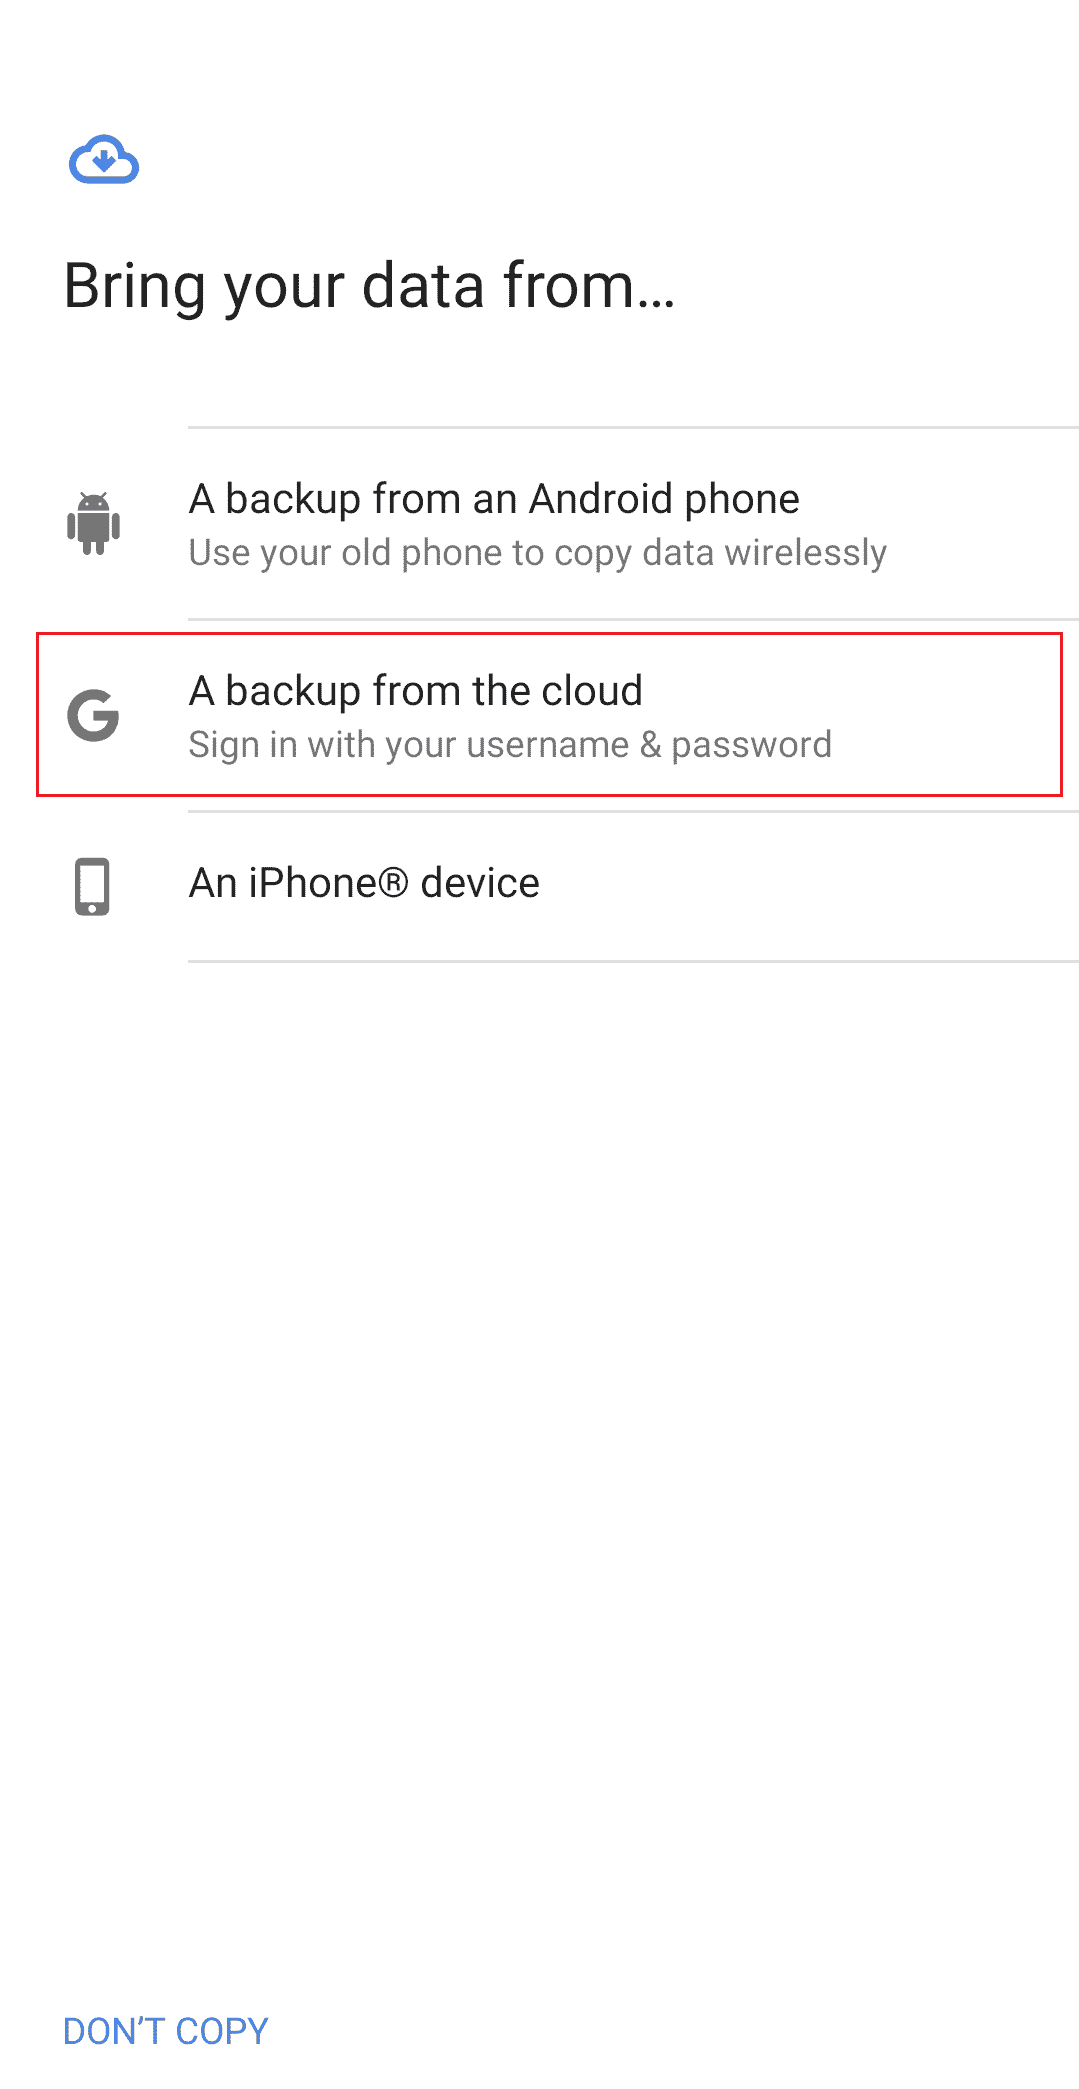 on Bring your data from setup screen, tap on A backup from the cloud